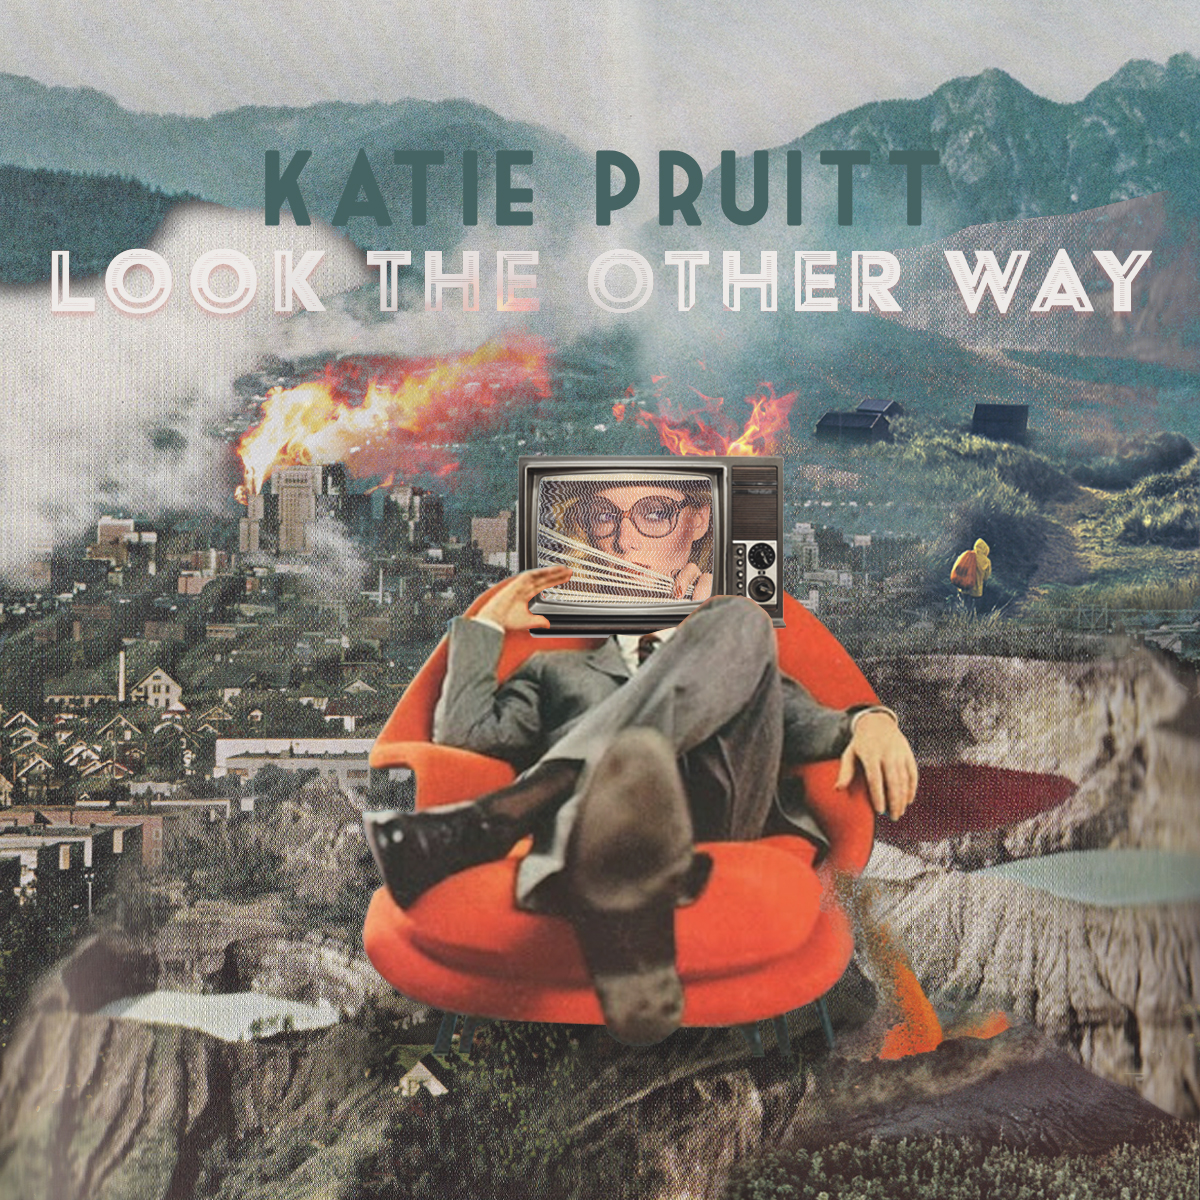 Cover art for Katie Pruitt's single, "Look the Other Way"